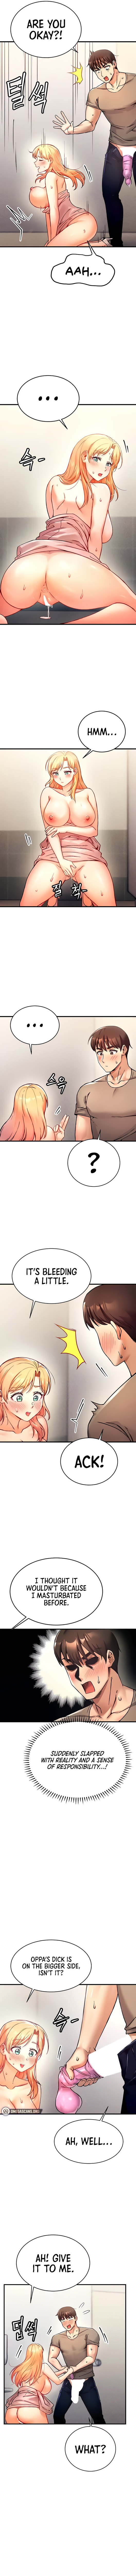 Kangcheol’s Bosses - Chapter 4 Page 7